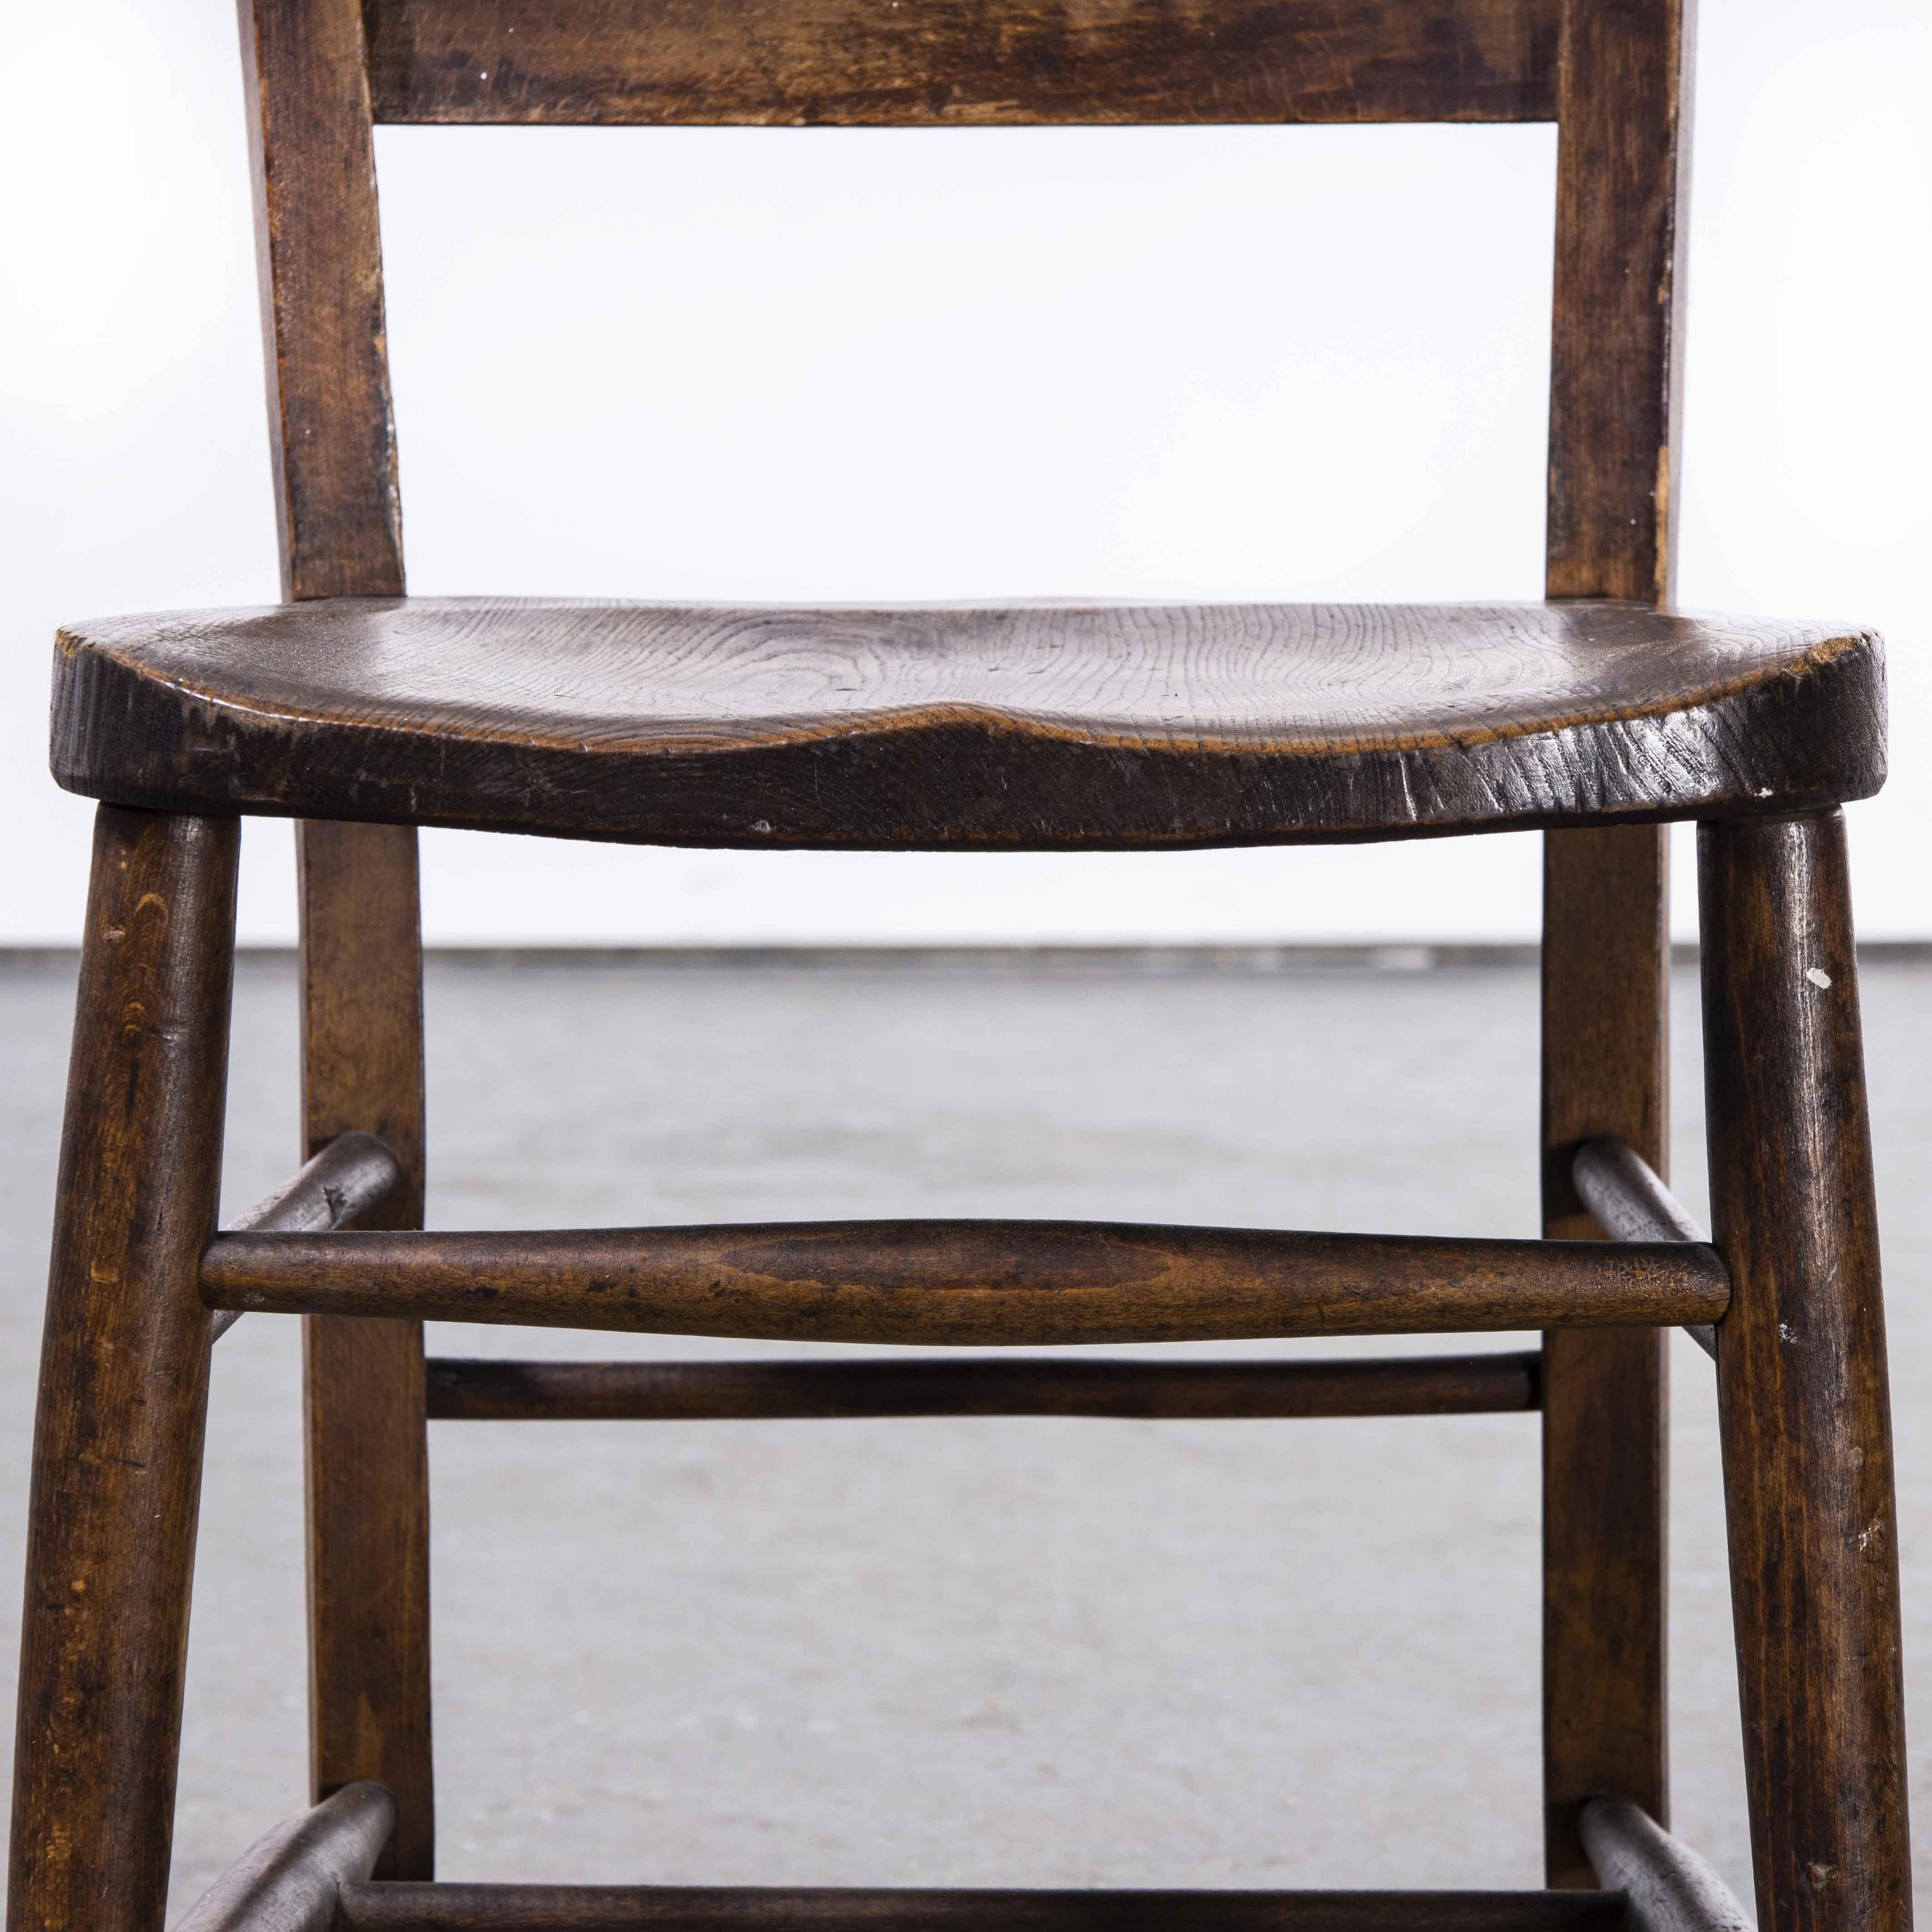 1930’s dark Ash and Elm Church – chapel dining chairs – various quantities available

1930’s dark Ash and Elm Church – chapel dining chairs – various quantities available. England has a wonderfully rich heritage for making chairs. At the height of